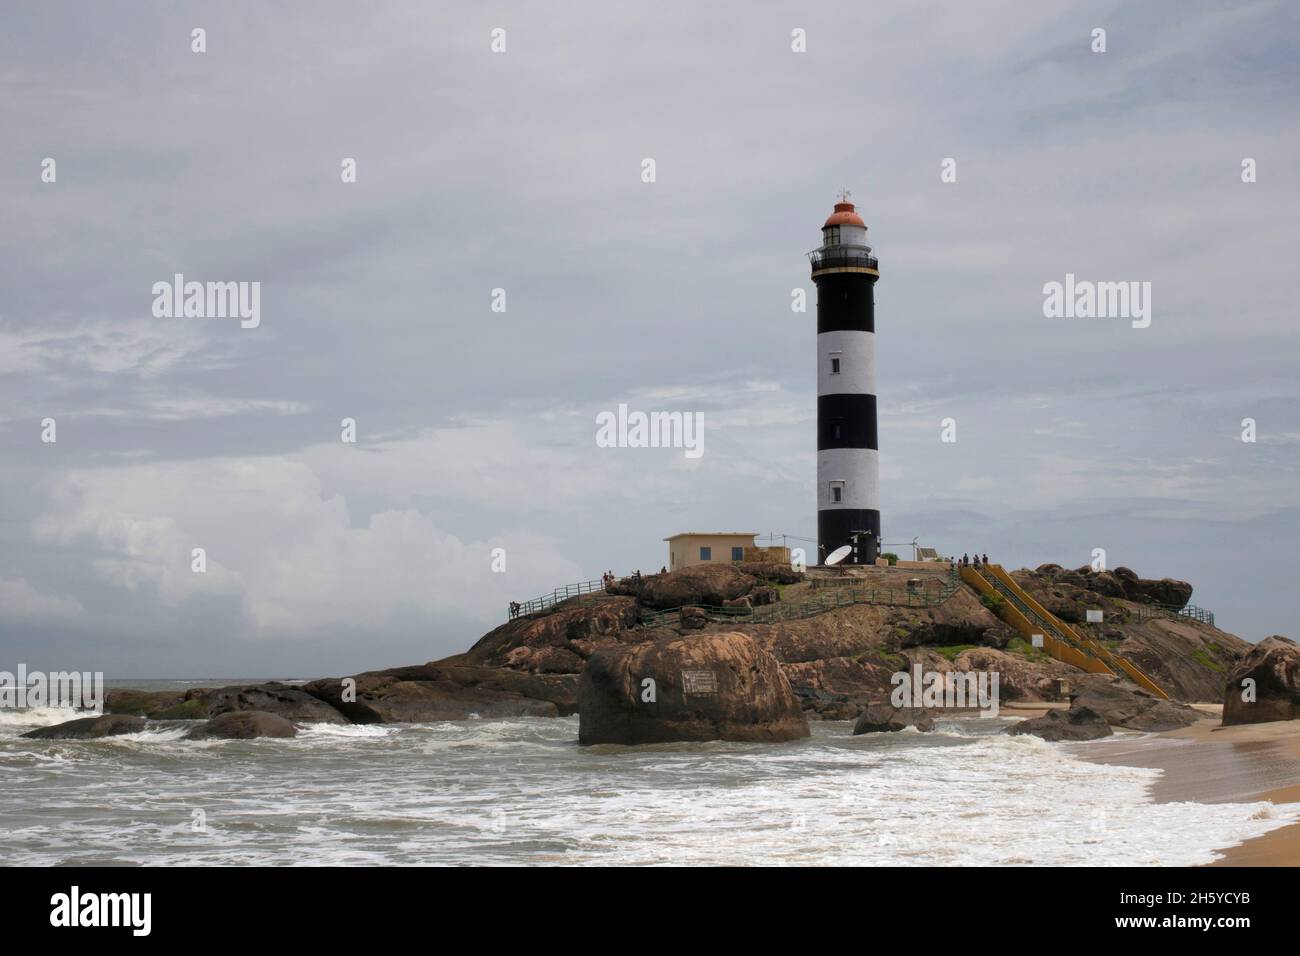 Kapu beach and lighthouse was built in 1901. Kapu lighthouse is 27 meters tall. Constructed on a rock , Mangalore, India Stock Photo